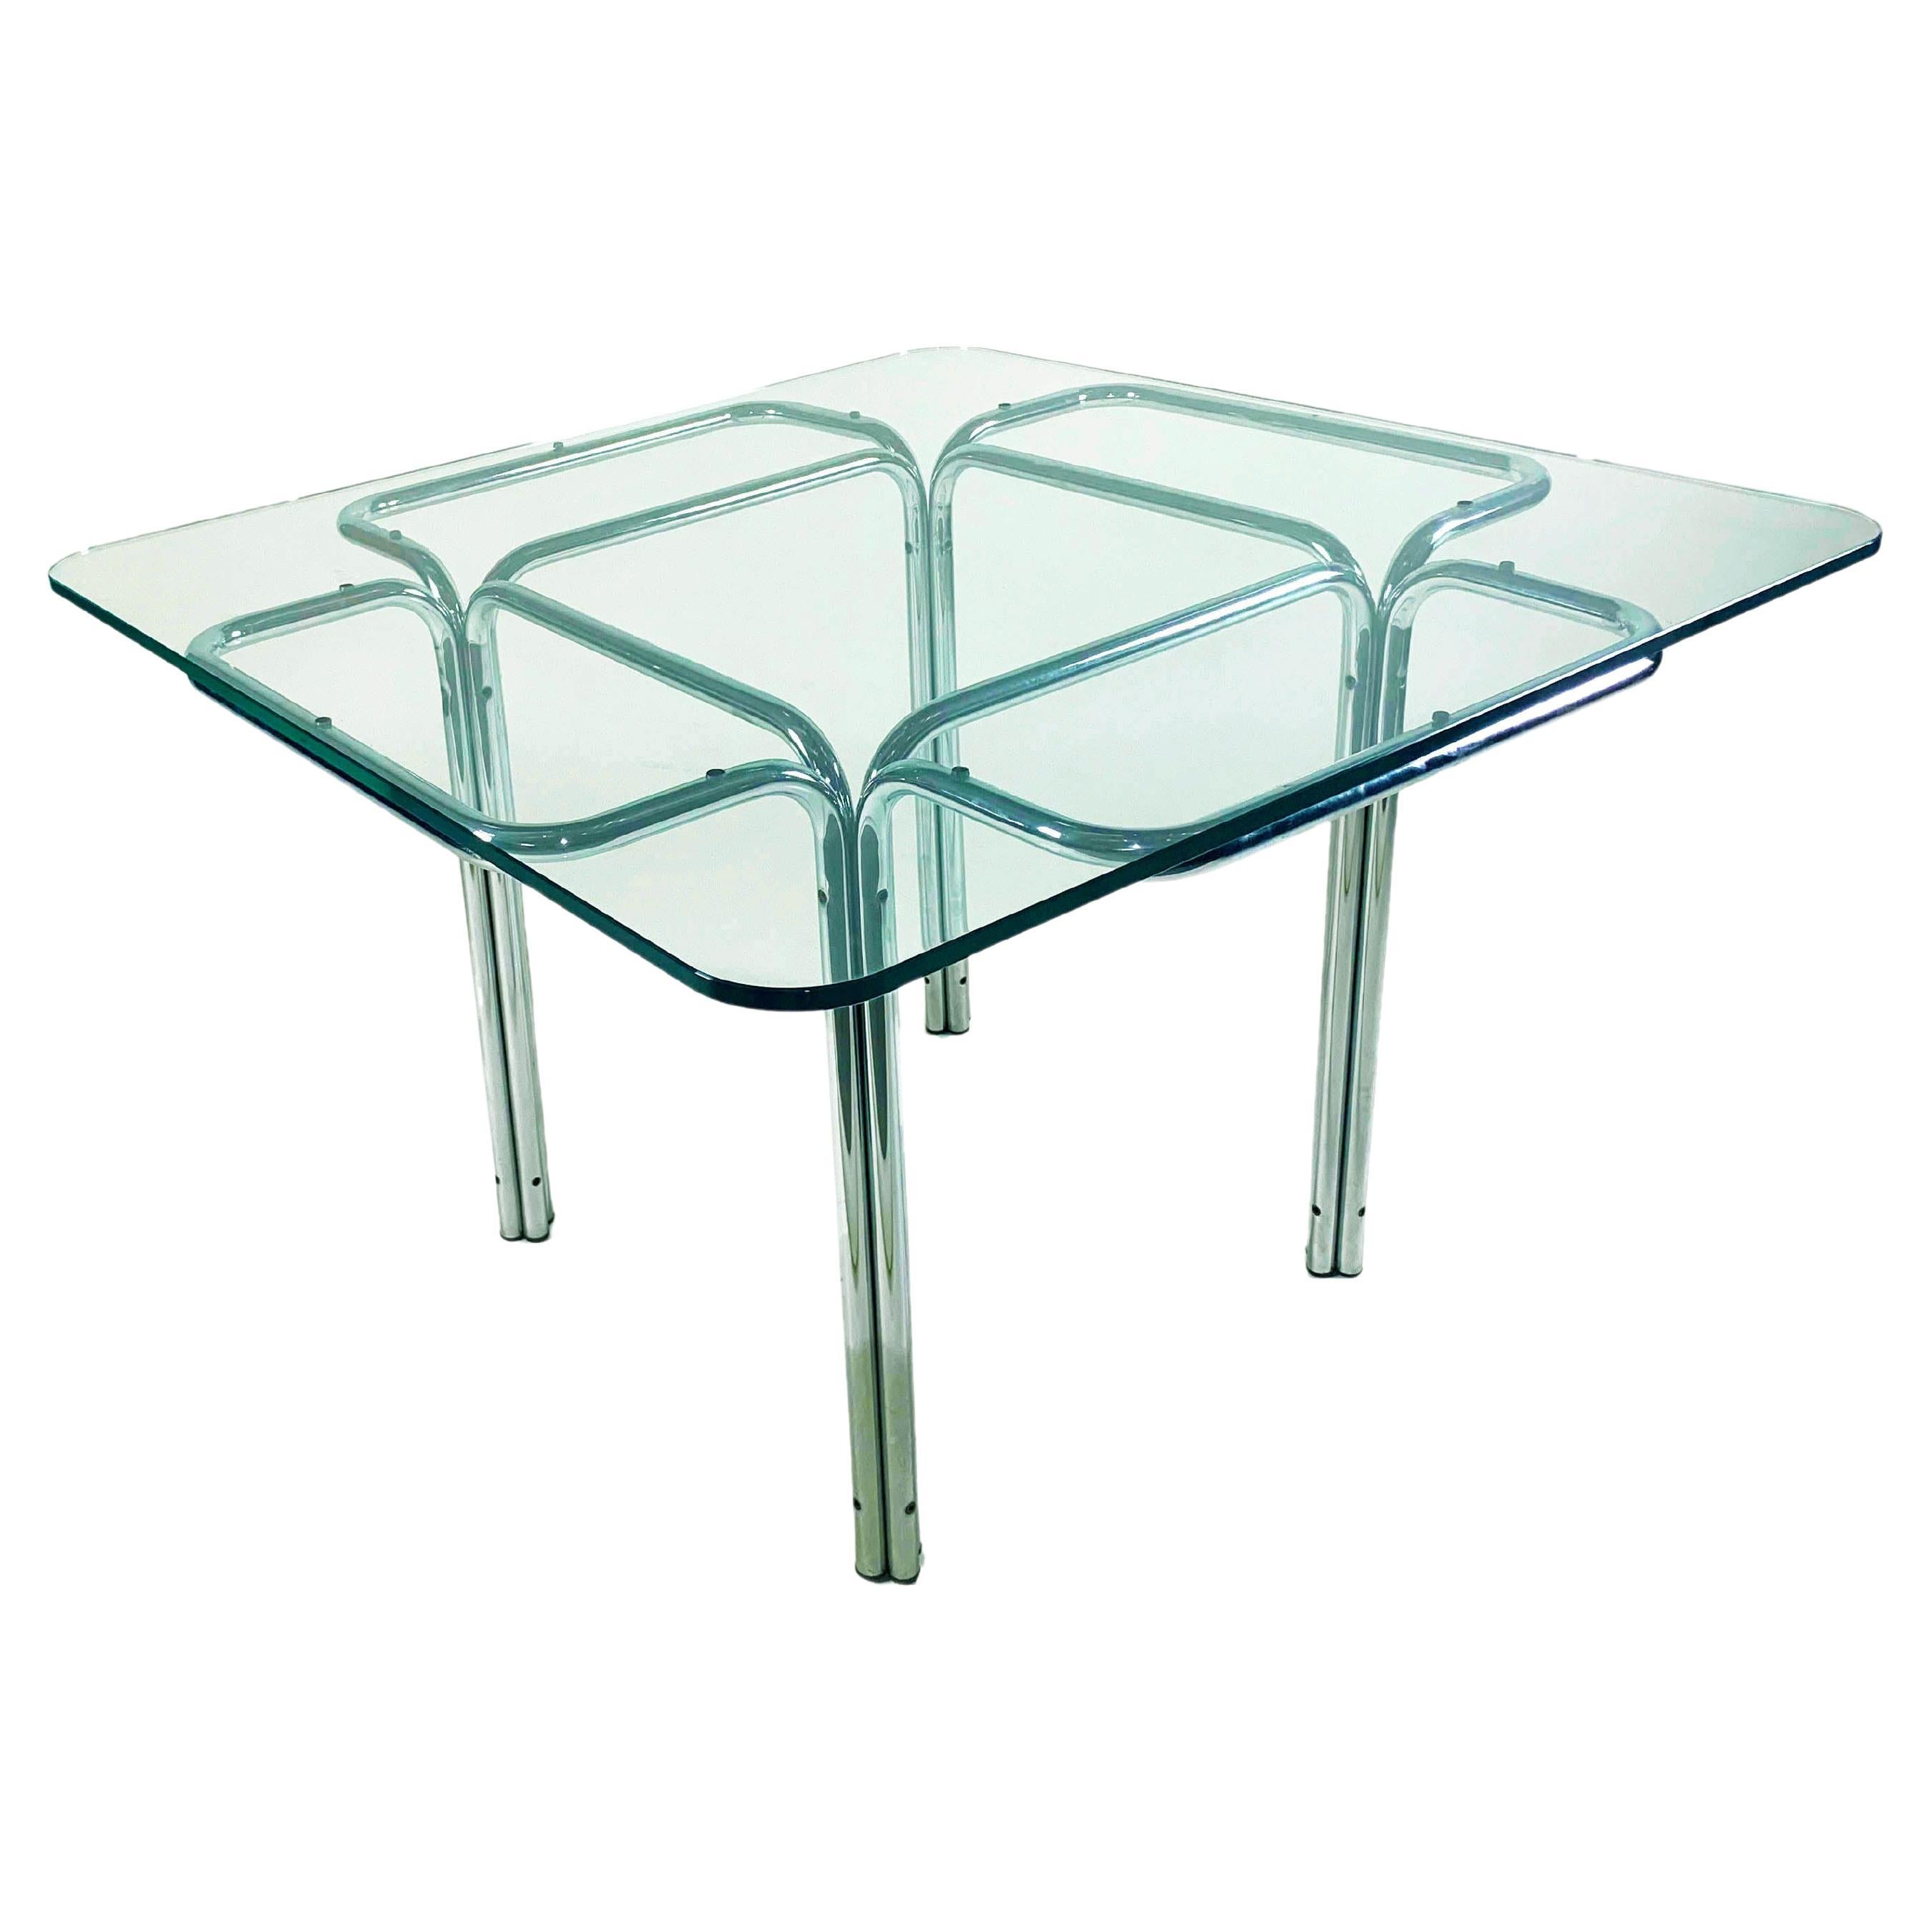 Topos table by Gruppo Dam for Gruppo Industriale Busnelli, 1969